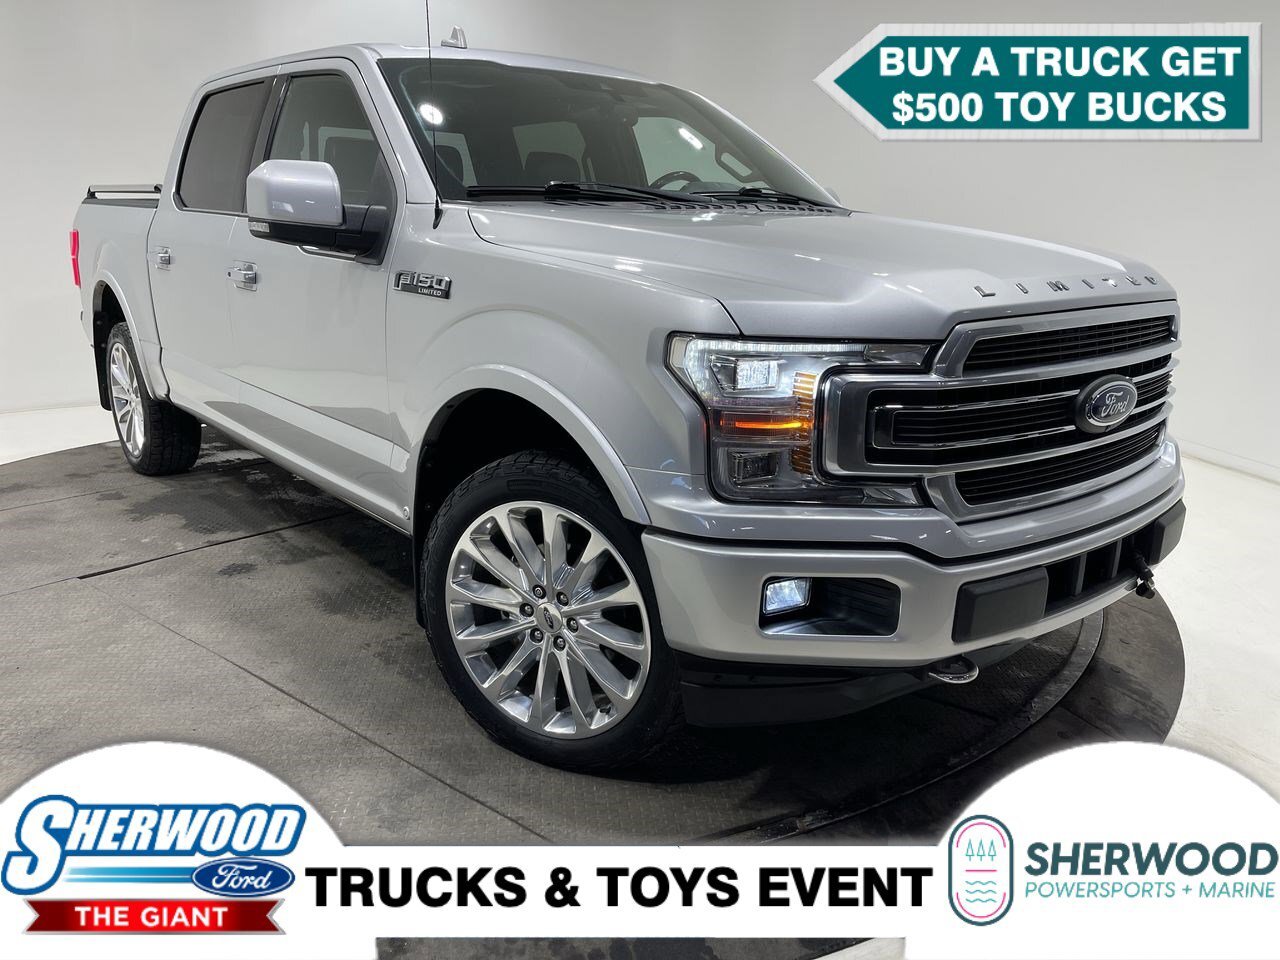 2018 Ford F-150 Limited- $0 Down $234 Weekly- MOONROOF- LEATHER